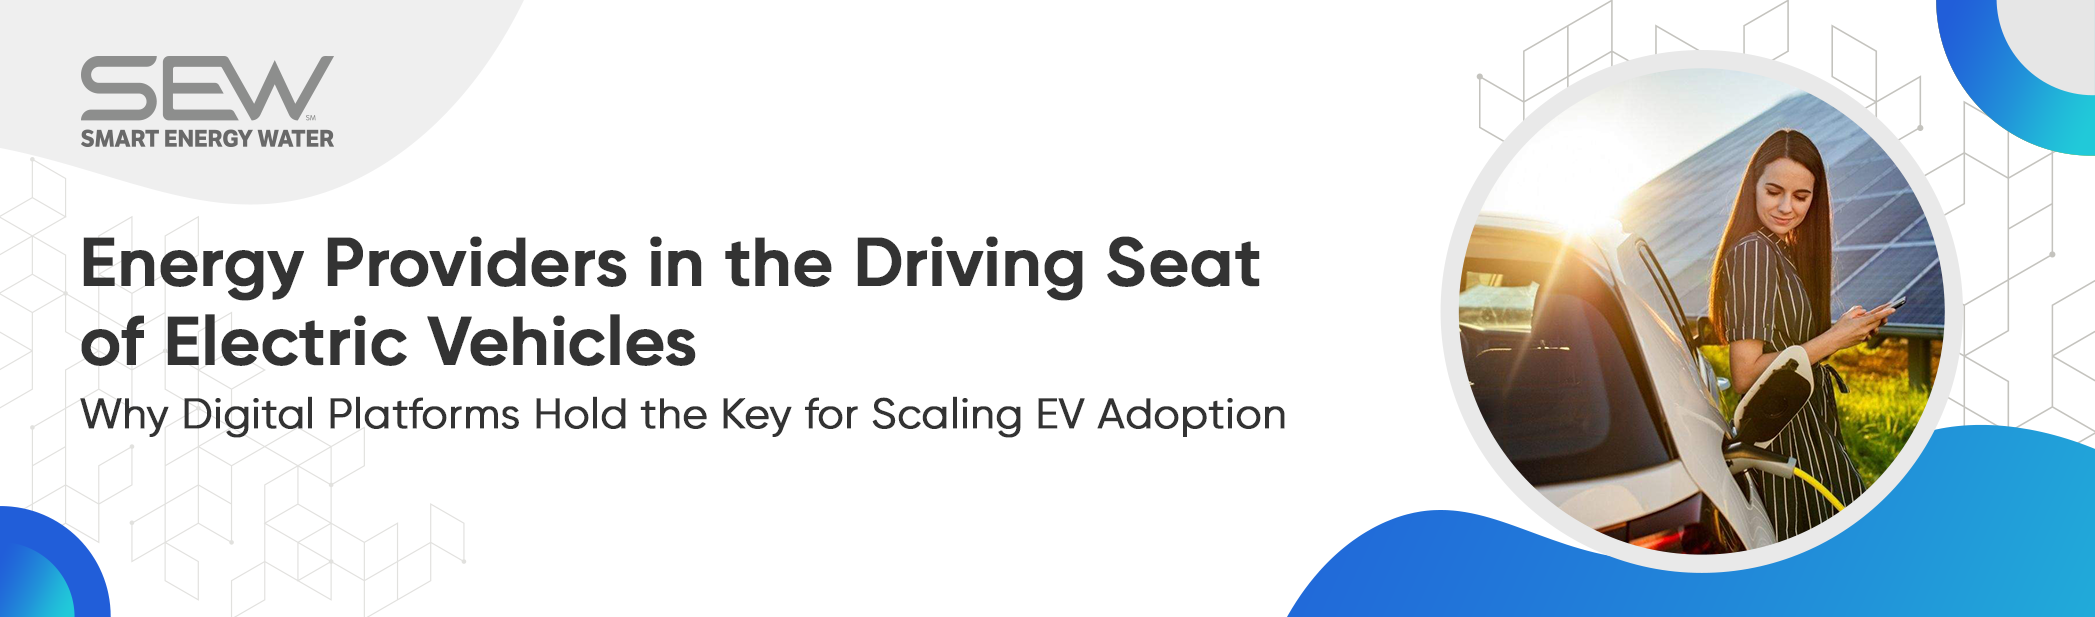 Energy Providers in the Driving Seat of Electric Vehicles: Why Digital Platforms Hold the Key for Scaling EV Adoption 